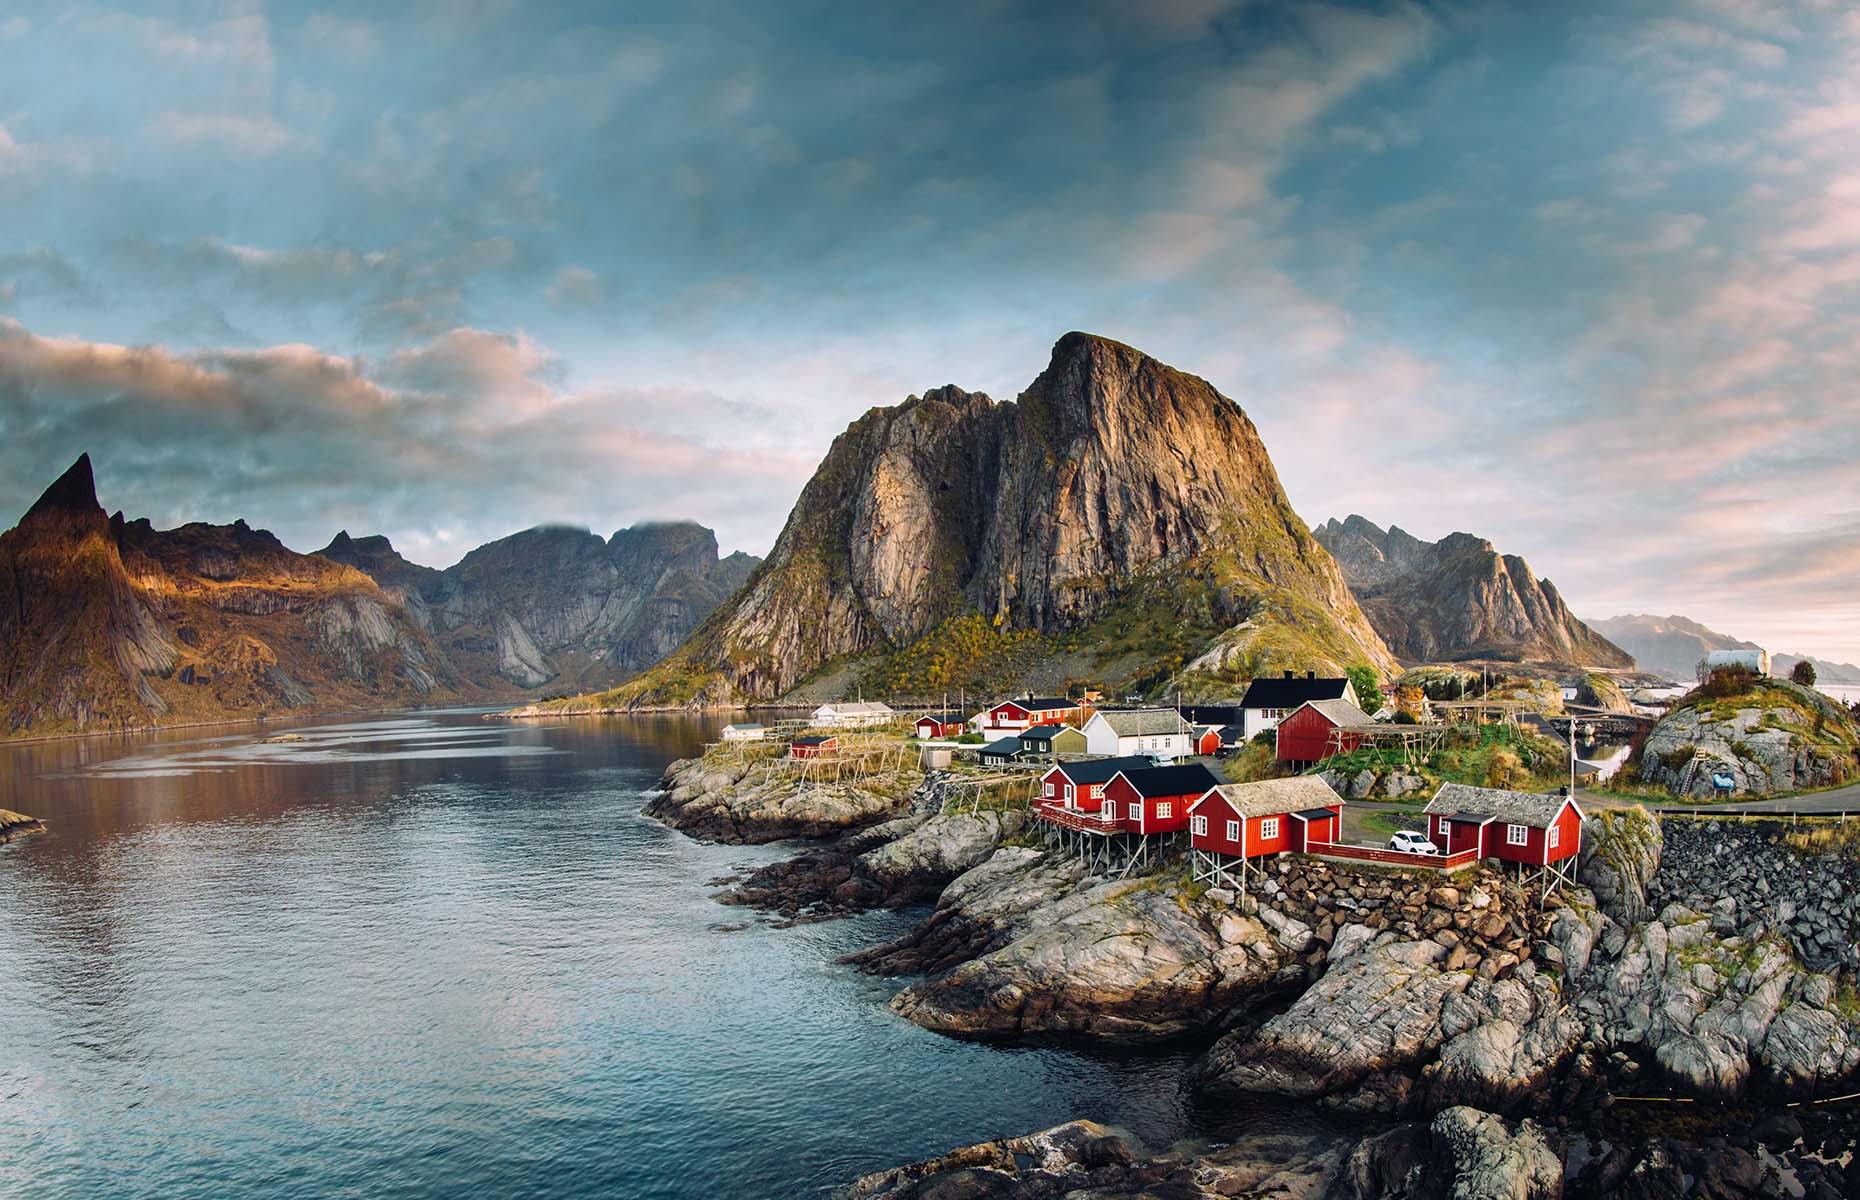 With its cliff-edge houses, deep fjords and rugged granite mountains surging out of the sea, Norway’s Lofoten archipelago is unapologetically untamed. The landscape is just as breathtaking on stormy days, when waves swirl ominously around the coastline, as it is on clear, serene days, when the sea acts as a mirror for Lofoten’s towering peaks. Pictured here is the ultra-photogenic island village of Hamnøy.